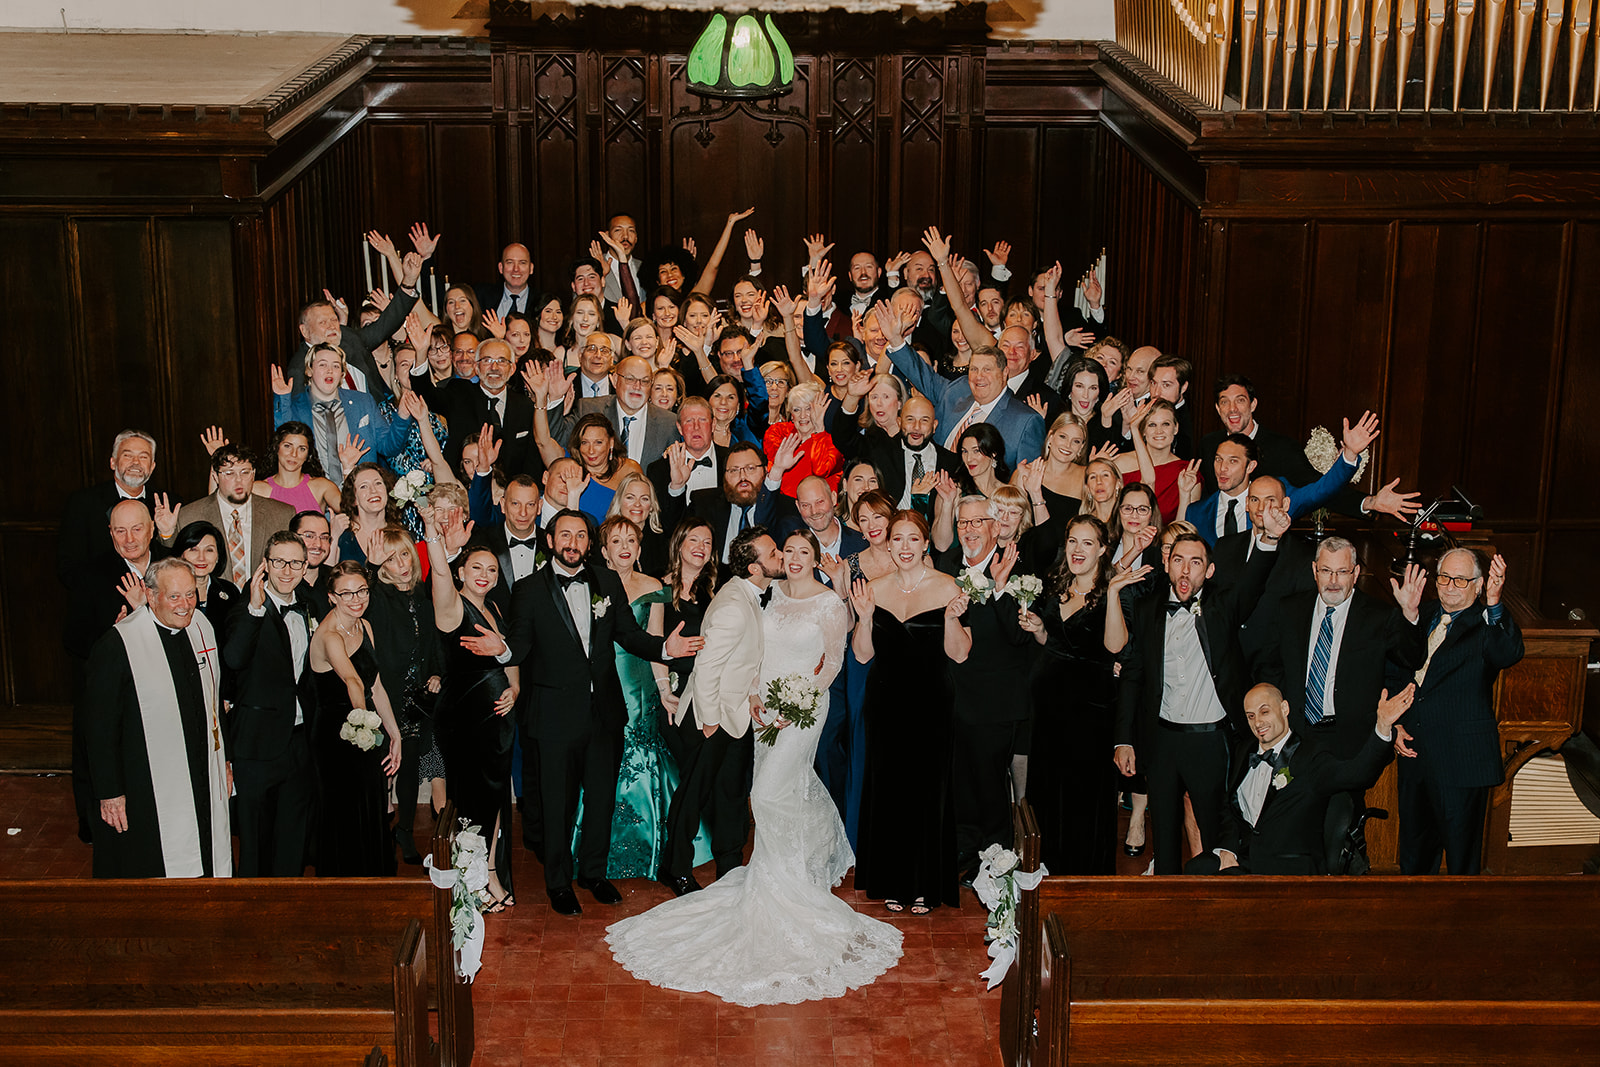 Bride and groom pose together surrounded by their guests